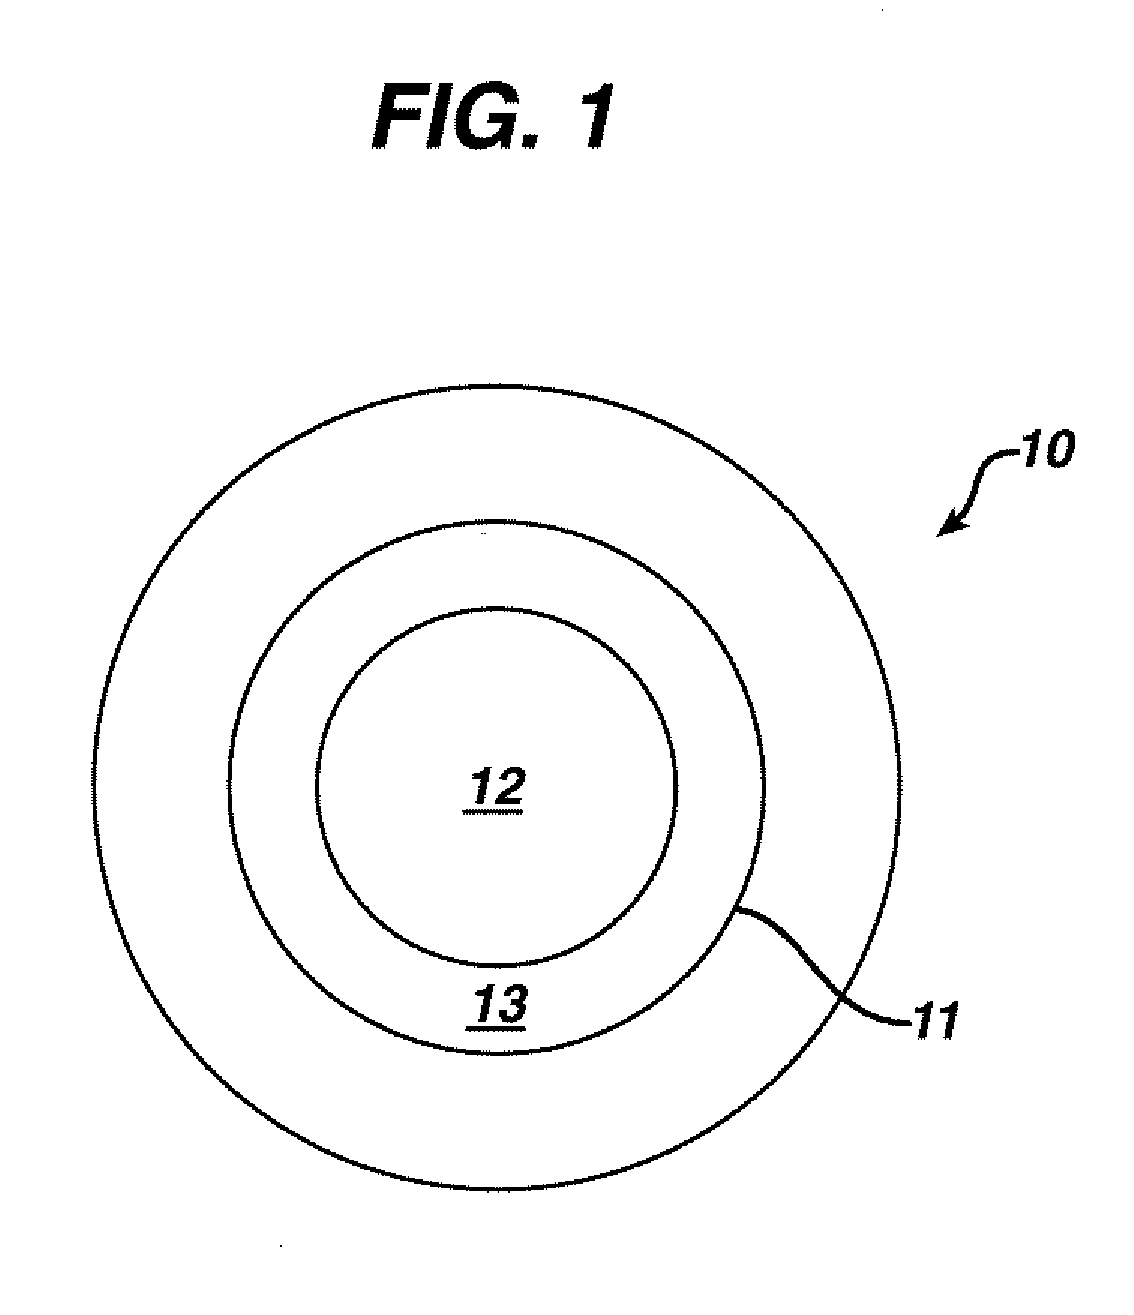 Lens designs for treating asthenopia caused by visual defects